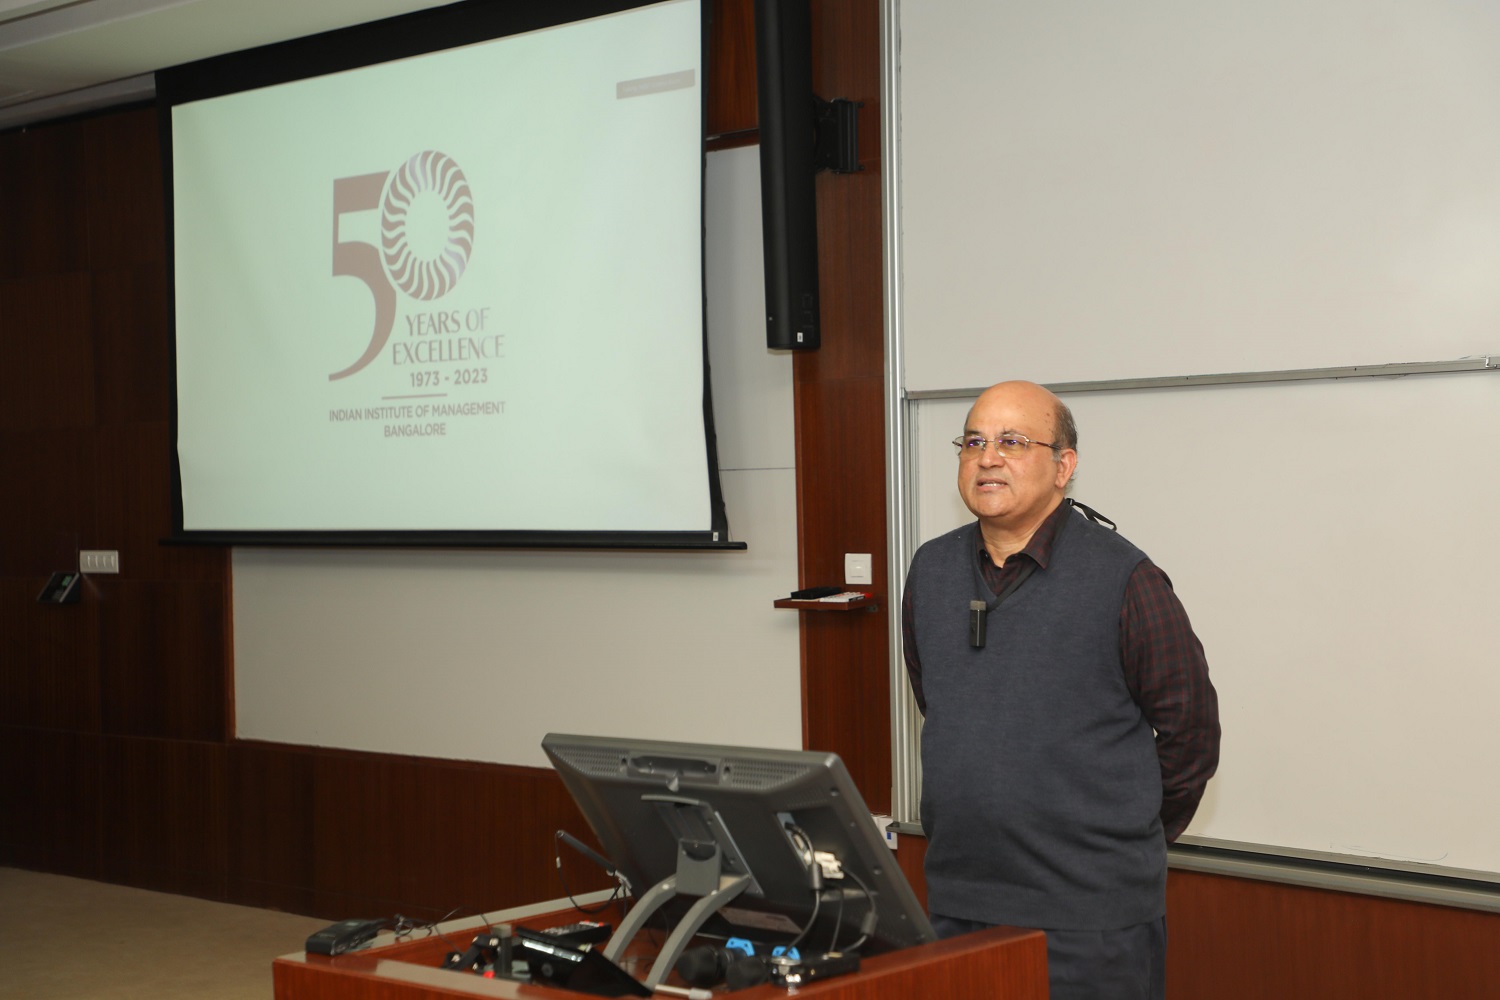 Prof. Rishikesha T Krishnan, Director, IIMB, speaks about the celebration plans during the launch of the Golden Jubilee logo